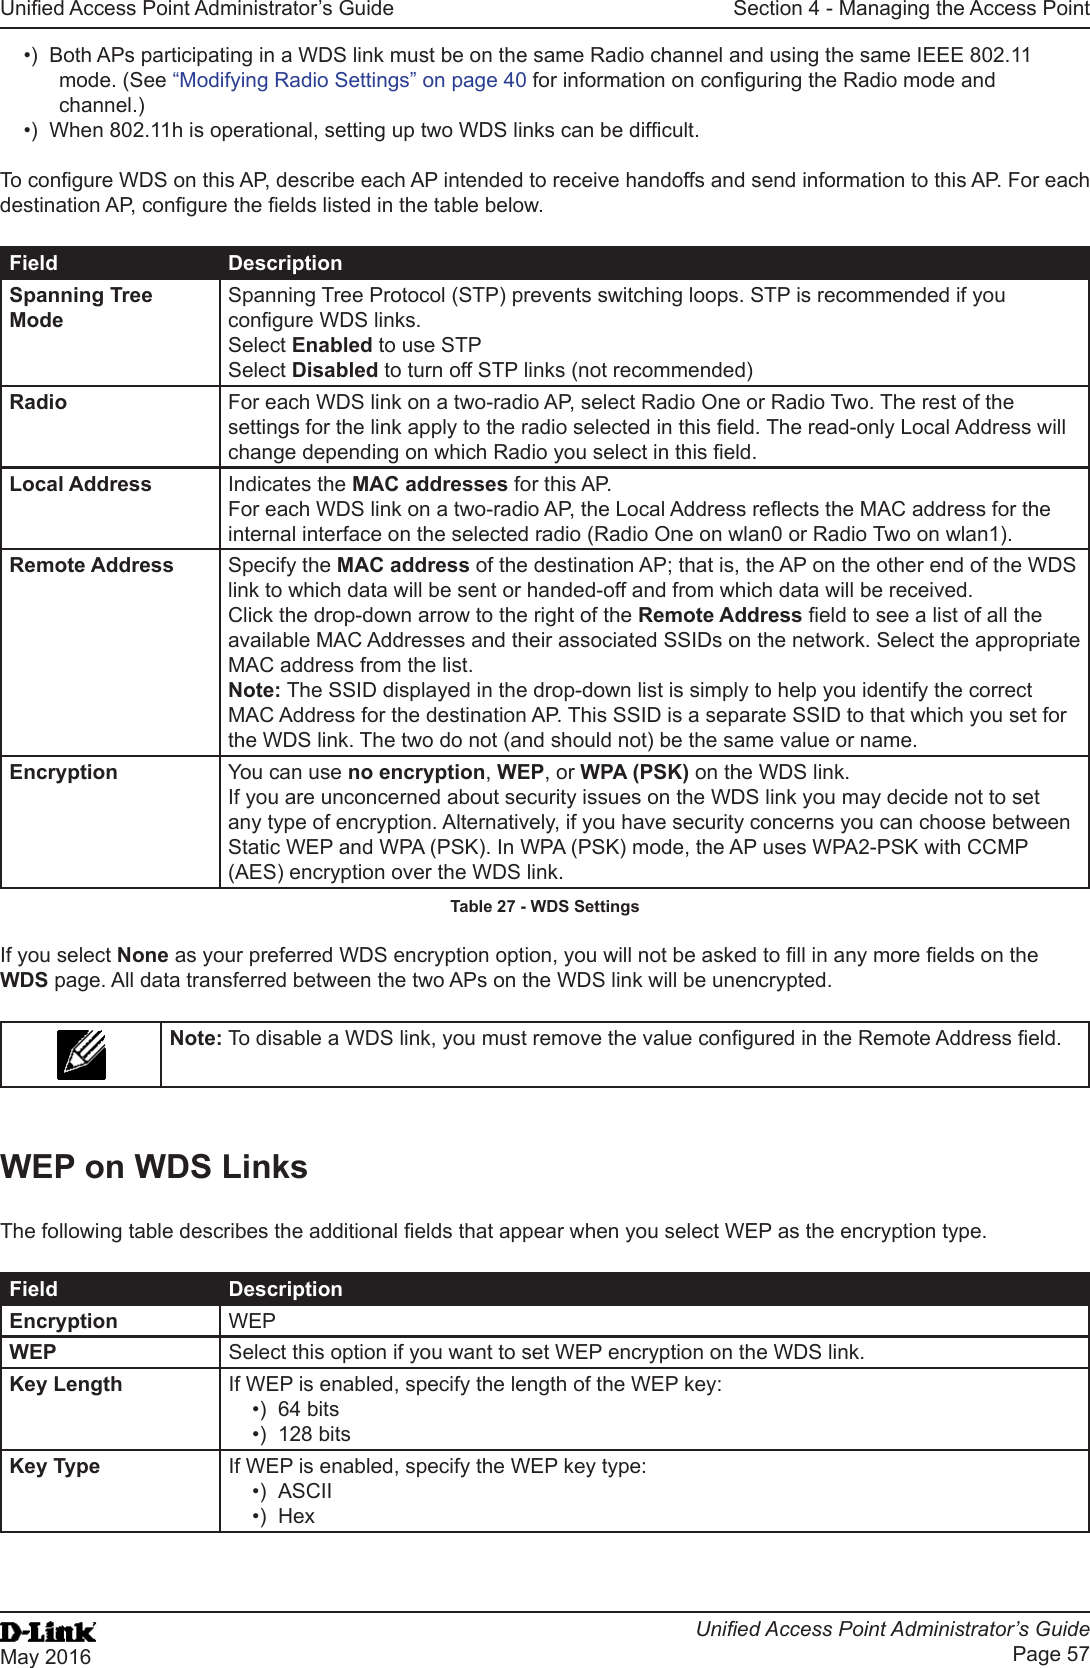 Unied Access Point Administrator’s GuideUnied Access Point Administrator’s GuidePage 57May 2016Section 4 - Managing the Access Point•)  Both APs participating in a WDS link must be on the same Radio channel and using the same IEEE 802.11 mode. (See “Modifying Radio Settings” on page 40 for information on conguring the Radio mode and channel.)•)  When 802.11h is operational, setting up two WDS links can be difcult.To congure WDS on this AP, describe each AP intended to receive handoffs and send information to this AP. For each destination AP, congure the elds listed in the table below.Field DescriptionSpanning Tree ModeSpanning Tree Protocol (STP) prevents switching loops. STP is recommended if you congure WDS links. Select Enabled to use STPSelect Disabled to turn off STP links (not recommended)Radio For each WDS link on a two-radio AP, select Radio One or Radio Two. The rest of the settings for the link apply to the radio selected in this eld. The read-only Local Address will change depending on which Radio you select in this eld.Local Address Indicates the MAC addresses for this AP.For each WDS link on a two-radio AP, the Local Address reects the MAC address for the internal interface on the selected radio (Radio One on wlan0 or Radio Two on wlan1).Remote Address Specify the MAC address of the destination AP; that is, the AP on the other end of the WDS link to which data will be sent or handed-off and from which data will be received.Click the drop-down arrow to the right of the Remote Address eld to see a list of all the available MAC Addresses and their associated SSIDs on the network. Select the appropriate MAC address from the list.Note: The SSID displayed in the drop-down list is simply to help you identify the correct MAC Address for the destination AP. This SSID is a separate SSID to that which you set for the WDS link. The two do not (and should not) be the same value or name.Encryption You can use no encryption, WEP, or WPA (PSK) on the WDS link. If you are unconcerned about security issues on the WDS link you may decide not to set any type of encryption. Alternatively, if you have security concerns you can choose between Static WEP and WPA (PSK). In WPA (PSK) mode, the AP uses WPA2-PSK with CCMP (AES) encryption over the WDS link.Table 27 - WDS SettingsIf you select None as your preferred WDS encryption option, you will not be asked to ll in any more elds on the WDS page. All data transferred between the two APs on the WDS link will be unencrypted.Note: To disable a WDS link, you must remove the value congured in the Remote Address eld.WEP on WDS LinksThe following table describes the additional elds that appear when you select WEP as the encryption type.Field DescriptionEncryption WEPWEP Select this option if you want to set WEP encryption on the WDS link.Key Length If WEP is enabled, specify the length of the WEP key:•)  64 bits•)  128 bitsKey Type If WEP is enabled, specify the WEP key type:•)  ASCII•)  Hex